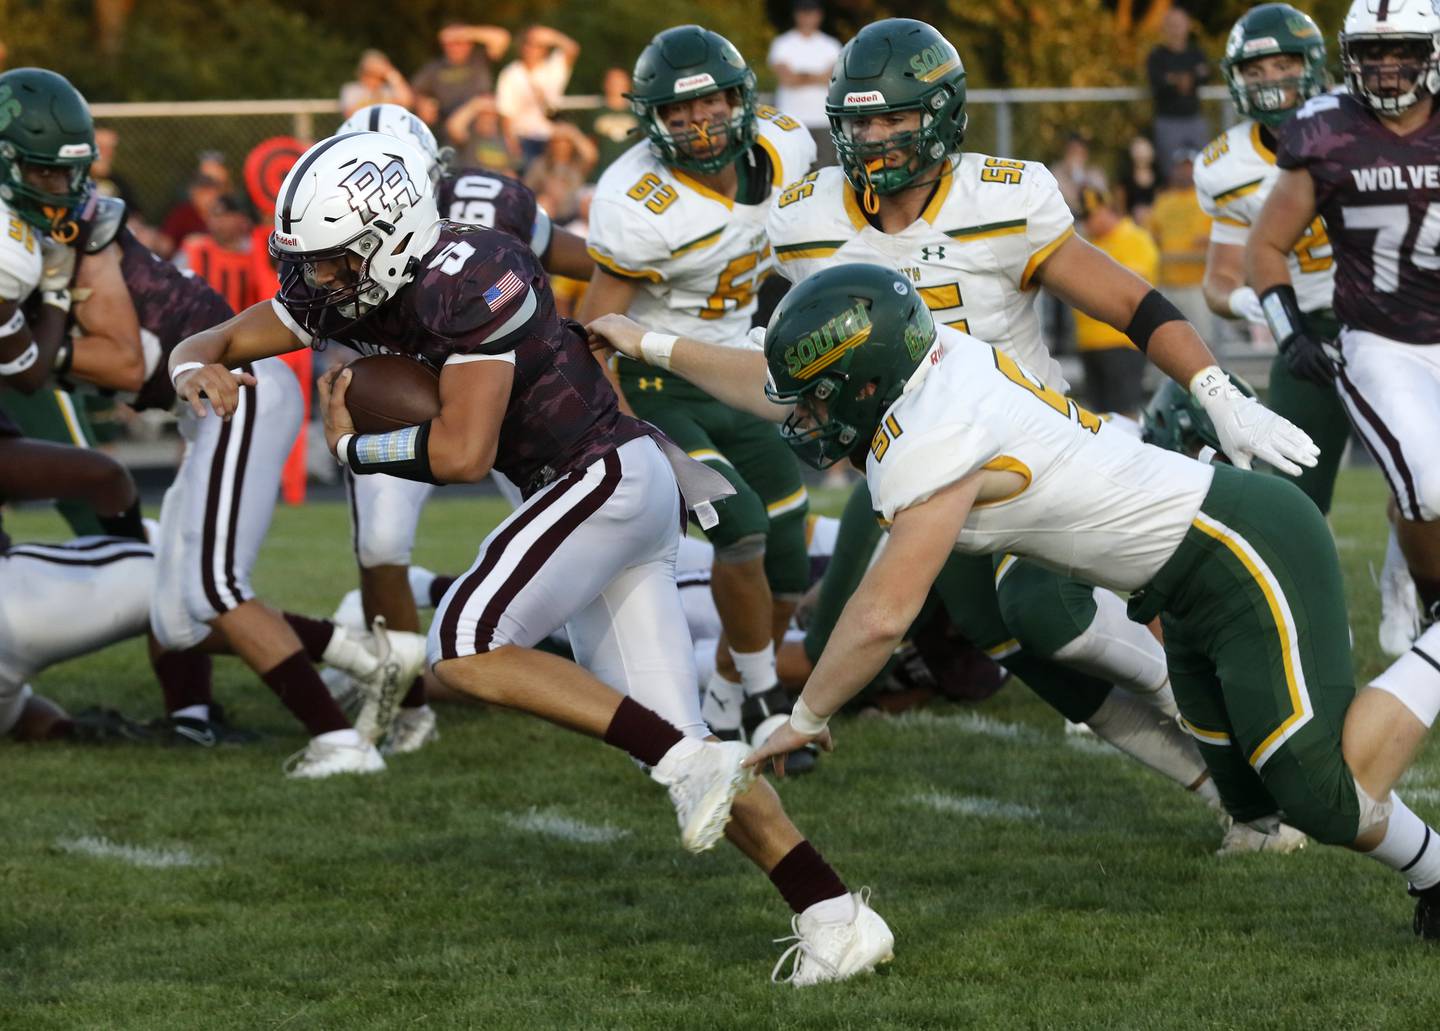 Prairie Ridge’s Joseph Vanderwell runs away from Crystal Lake South's Dominic Ariola during a Fox Valley Conference football game Friday, Sept. 1, 2023, at Prairie Ridge High School inCrystal Lake.